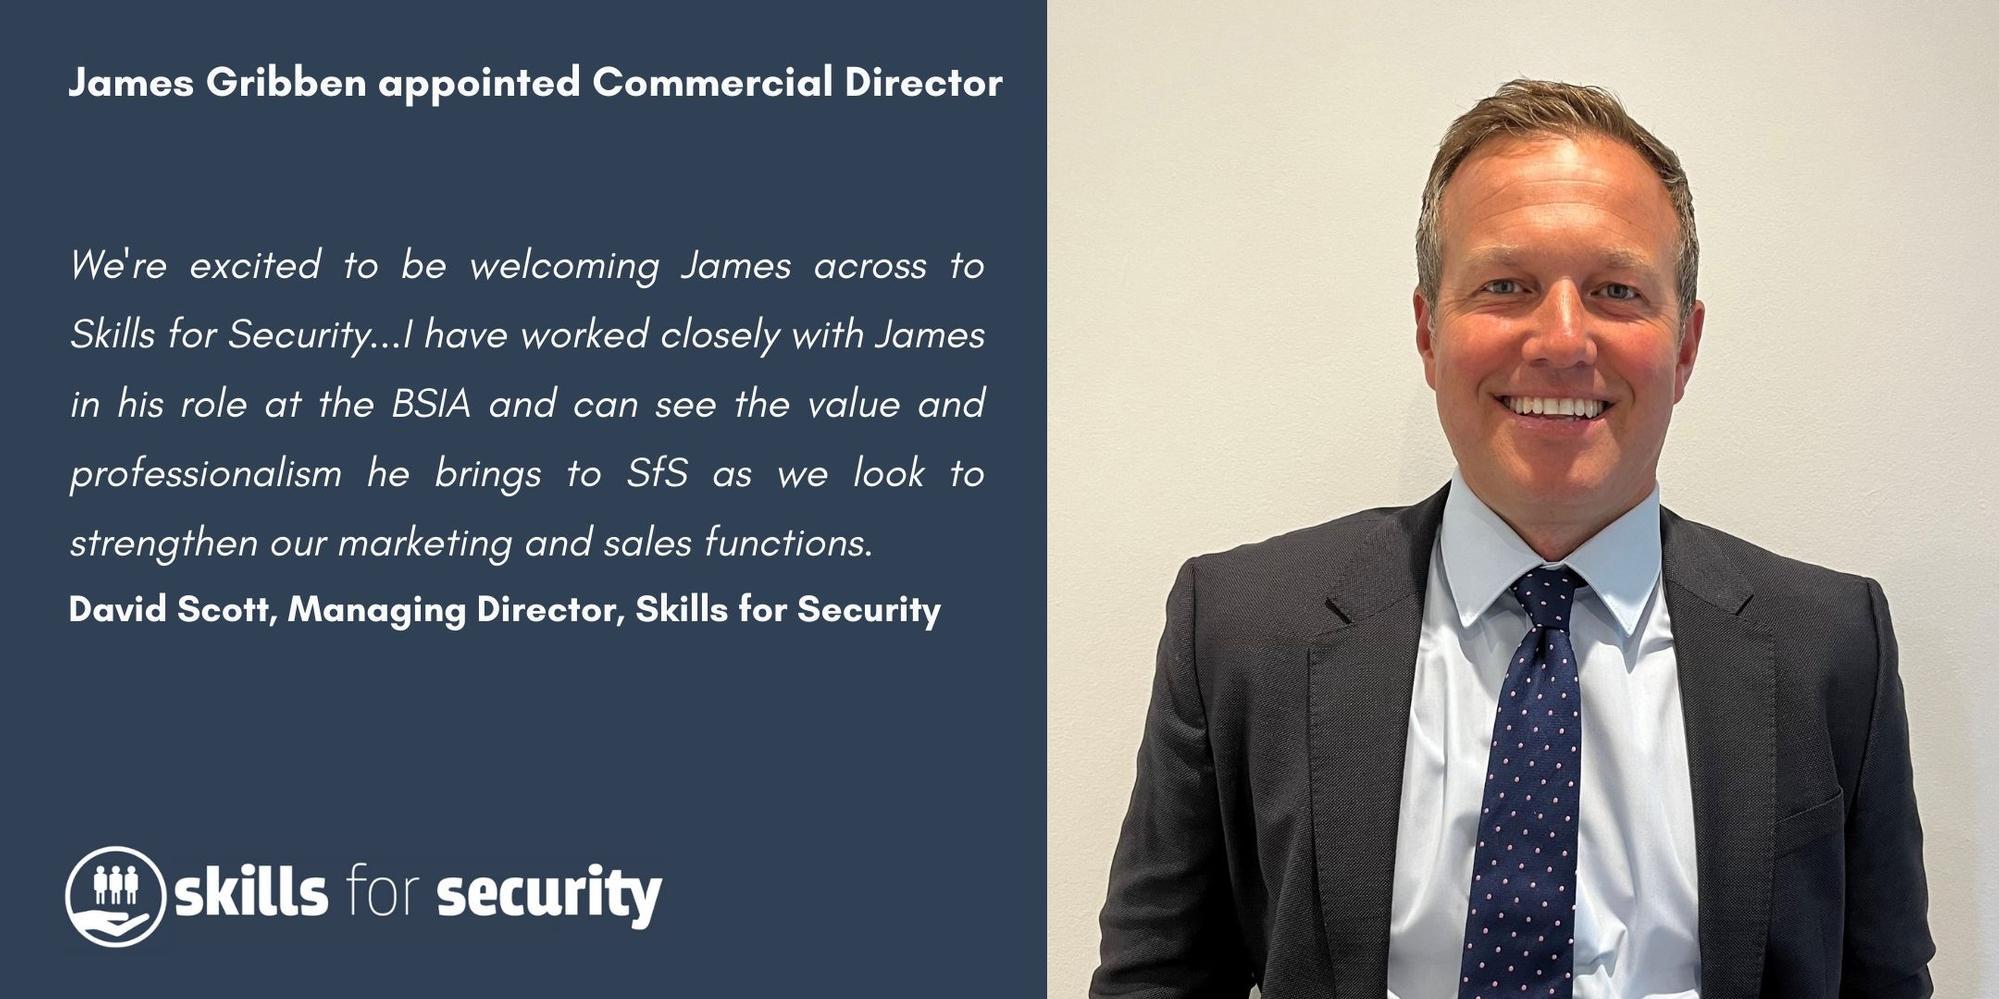 James Gribben appointed as Commercial Director at Skills for Security